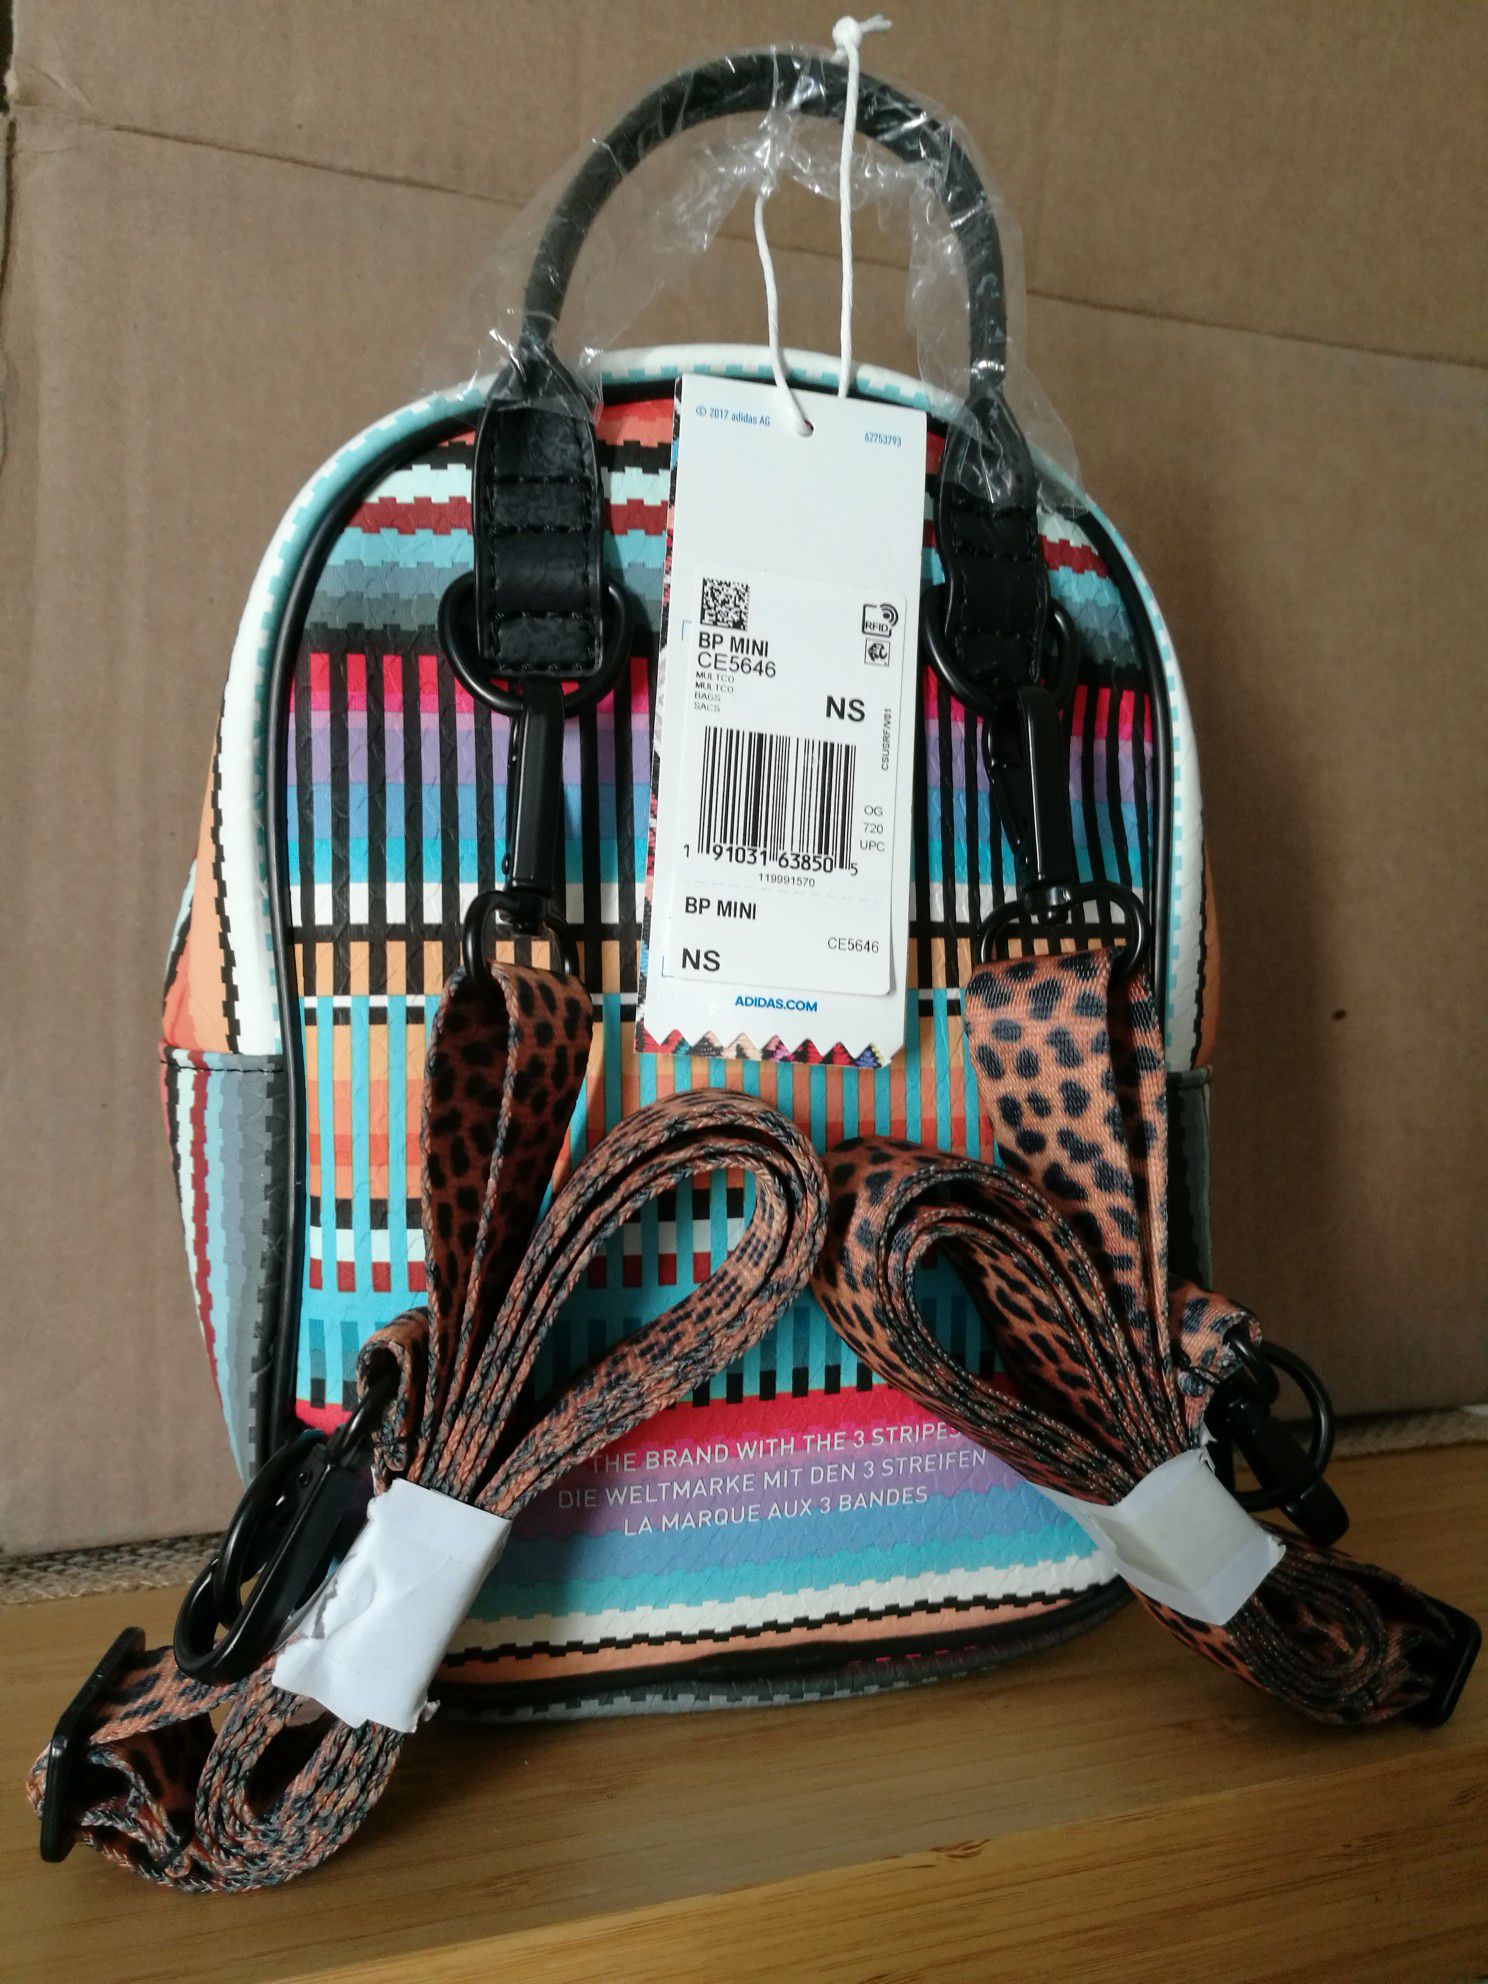 Adidas x The Mini Backpack for Sale Fresno, CA - OfferUp